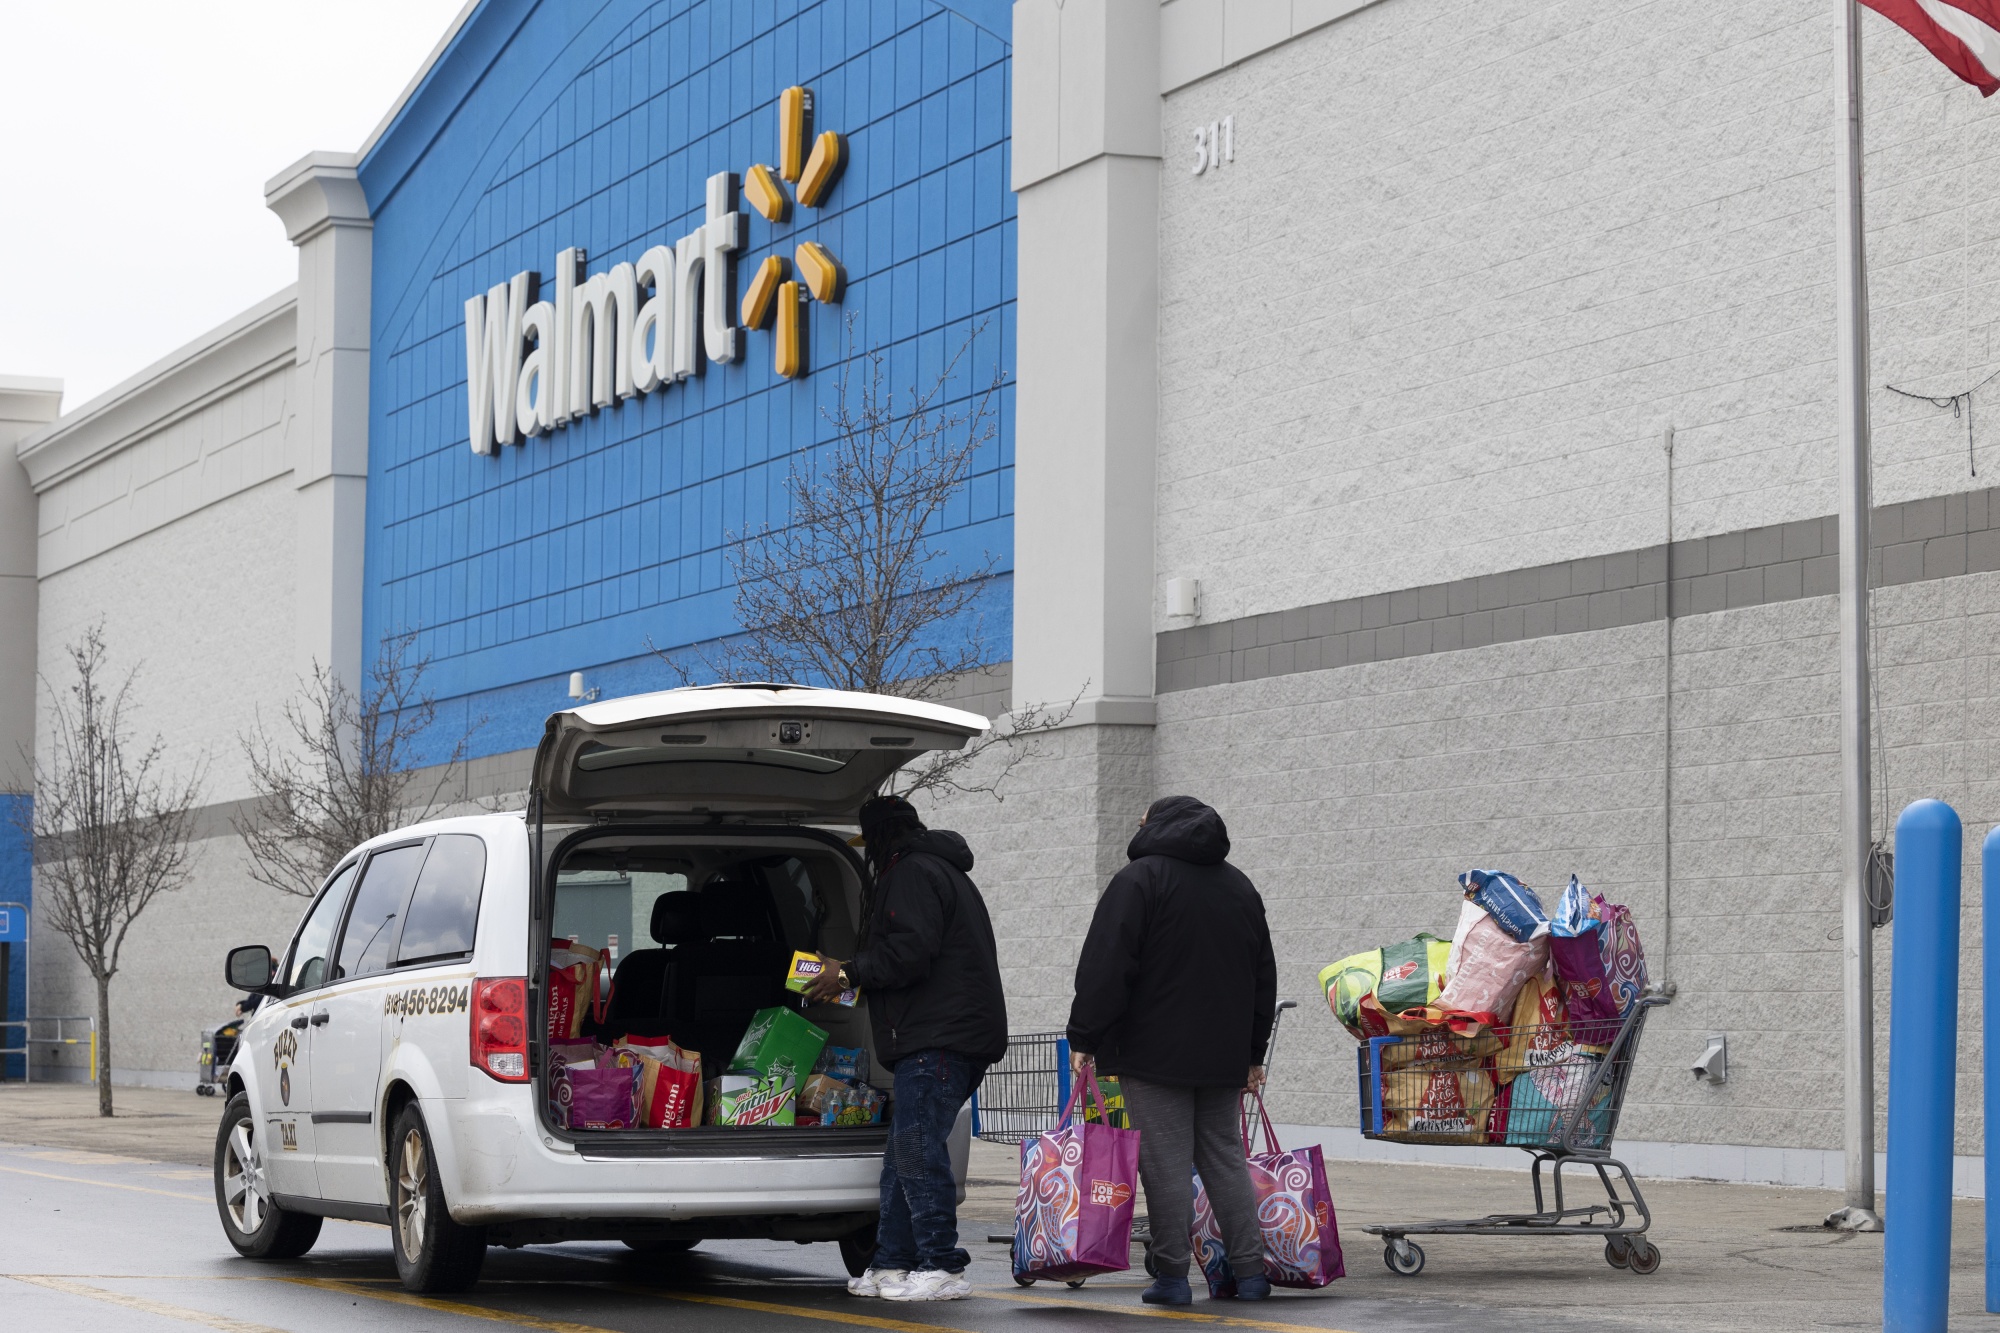 Shoppers load purchases into a vehicle outside a Walmart store in Albany, New York.